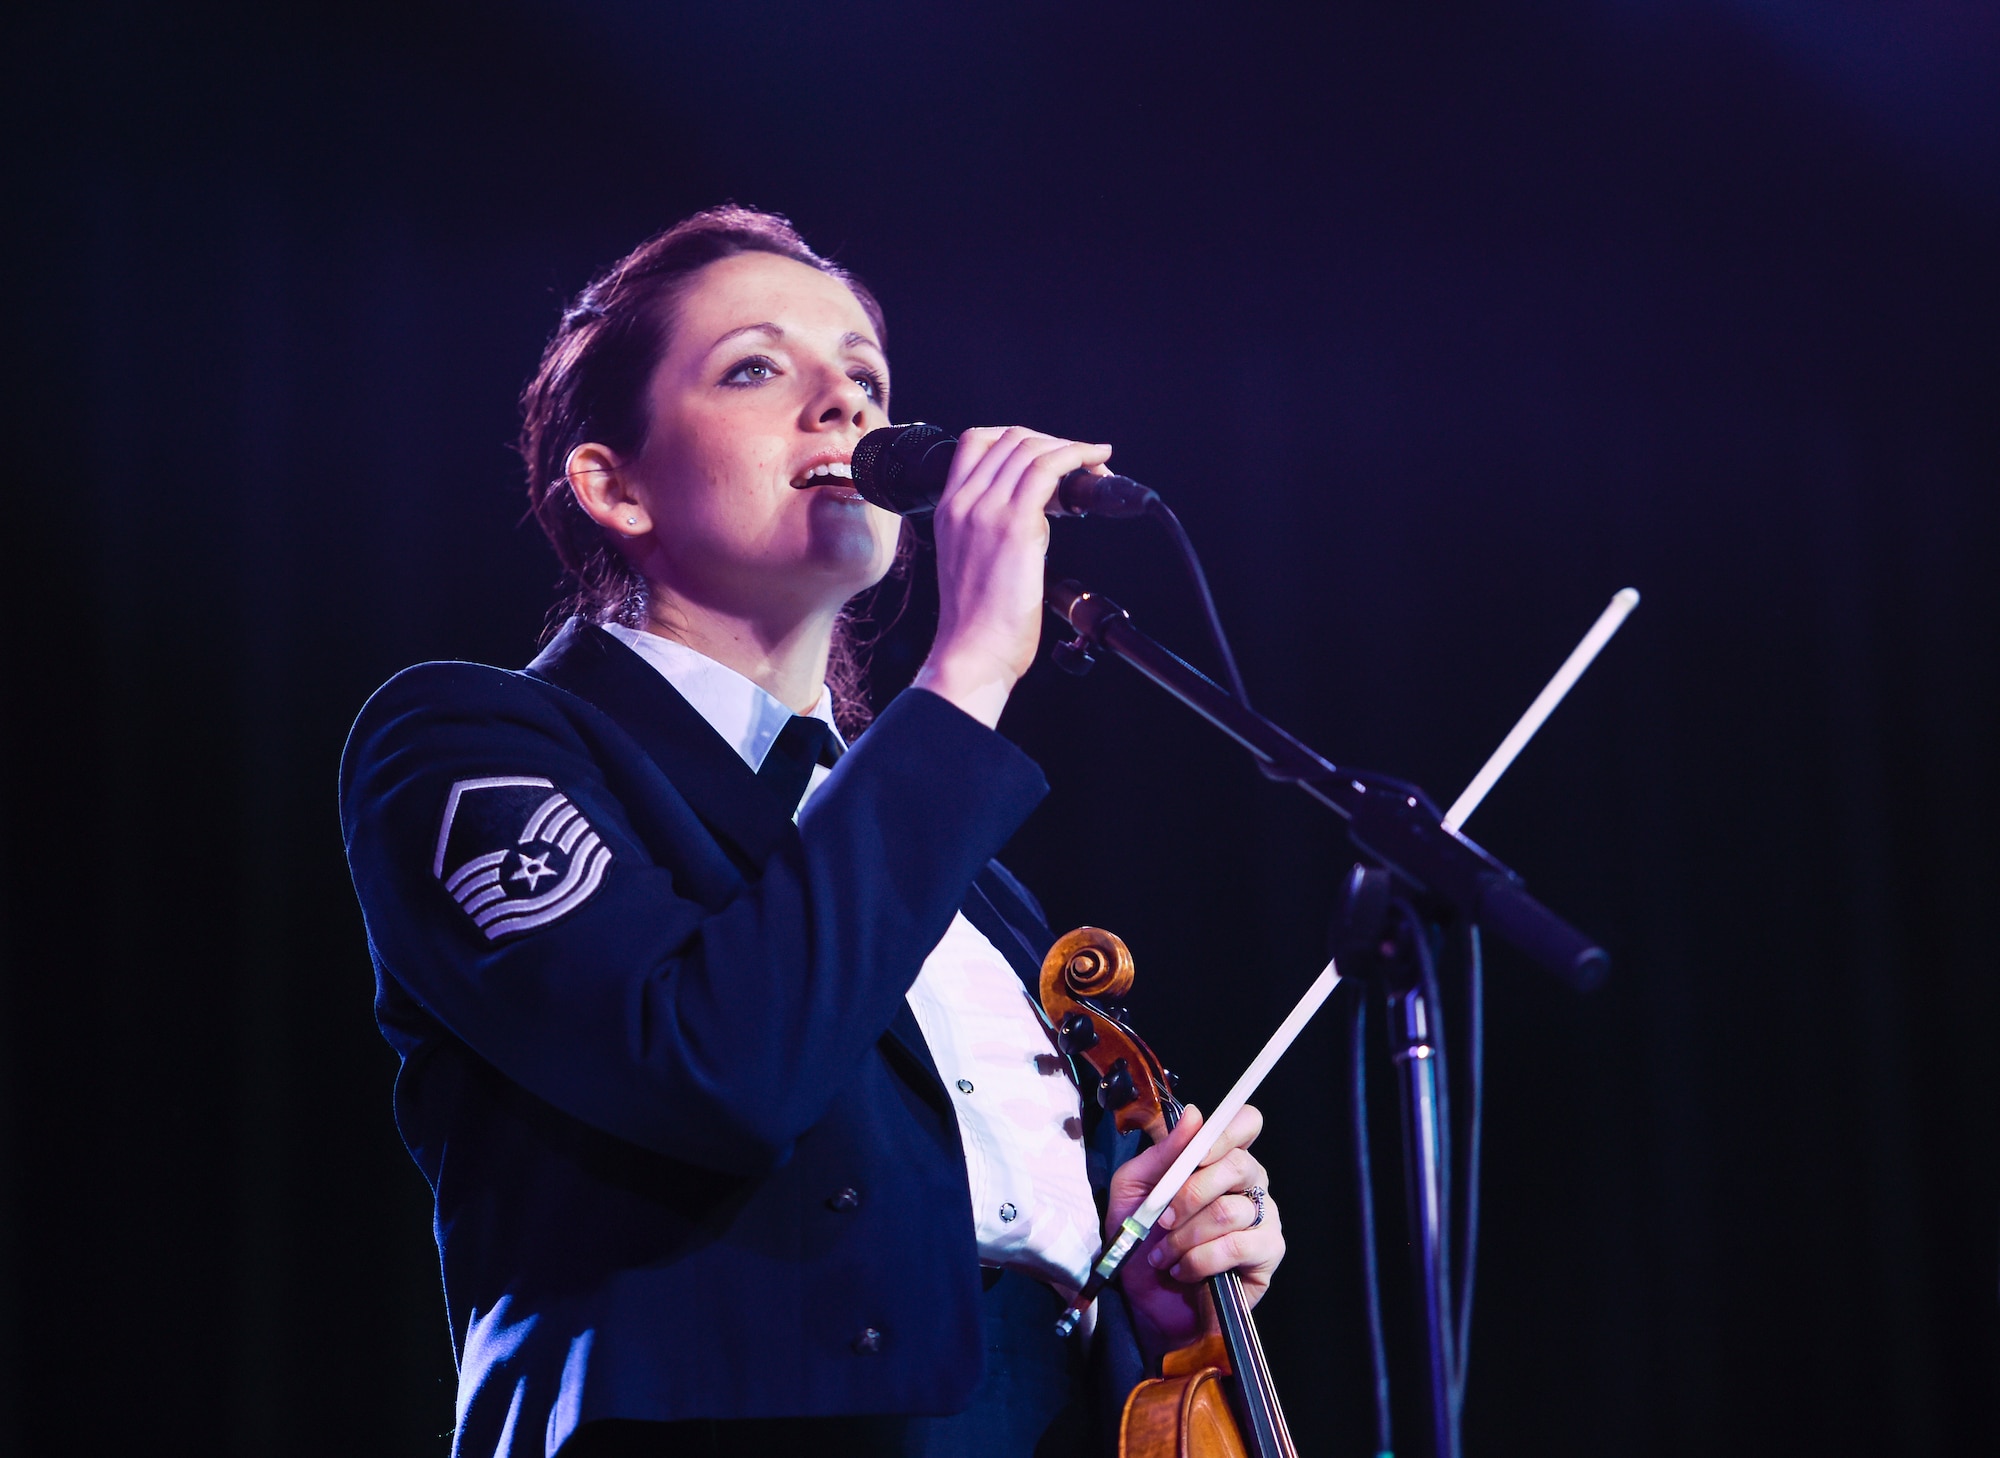 Master Sgt. Emily Wellington, United States Air Force Band’s Celtic Aire vocalist and violinist, sings an Irish song during a Celtic Aire performance at the Hippodrome Theatre in Waco, Texas, March 7, 2016. The band is the premier Celtic and folk ensemble of the U.S. Air Force Band. (U.S. Air Force photo by Senior Airman Ryan J. Sonnier/RELEASED)